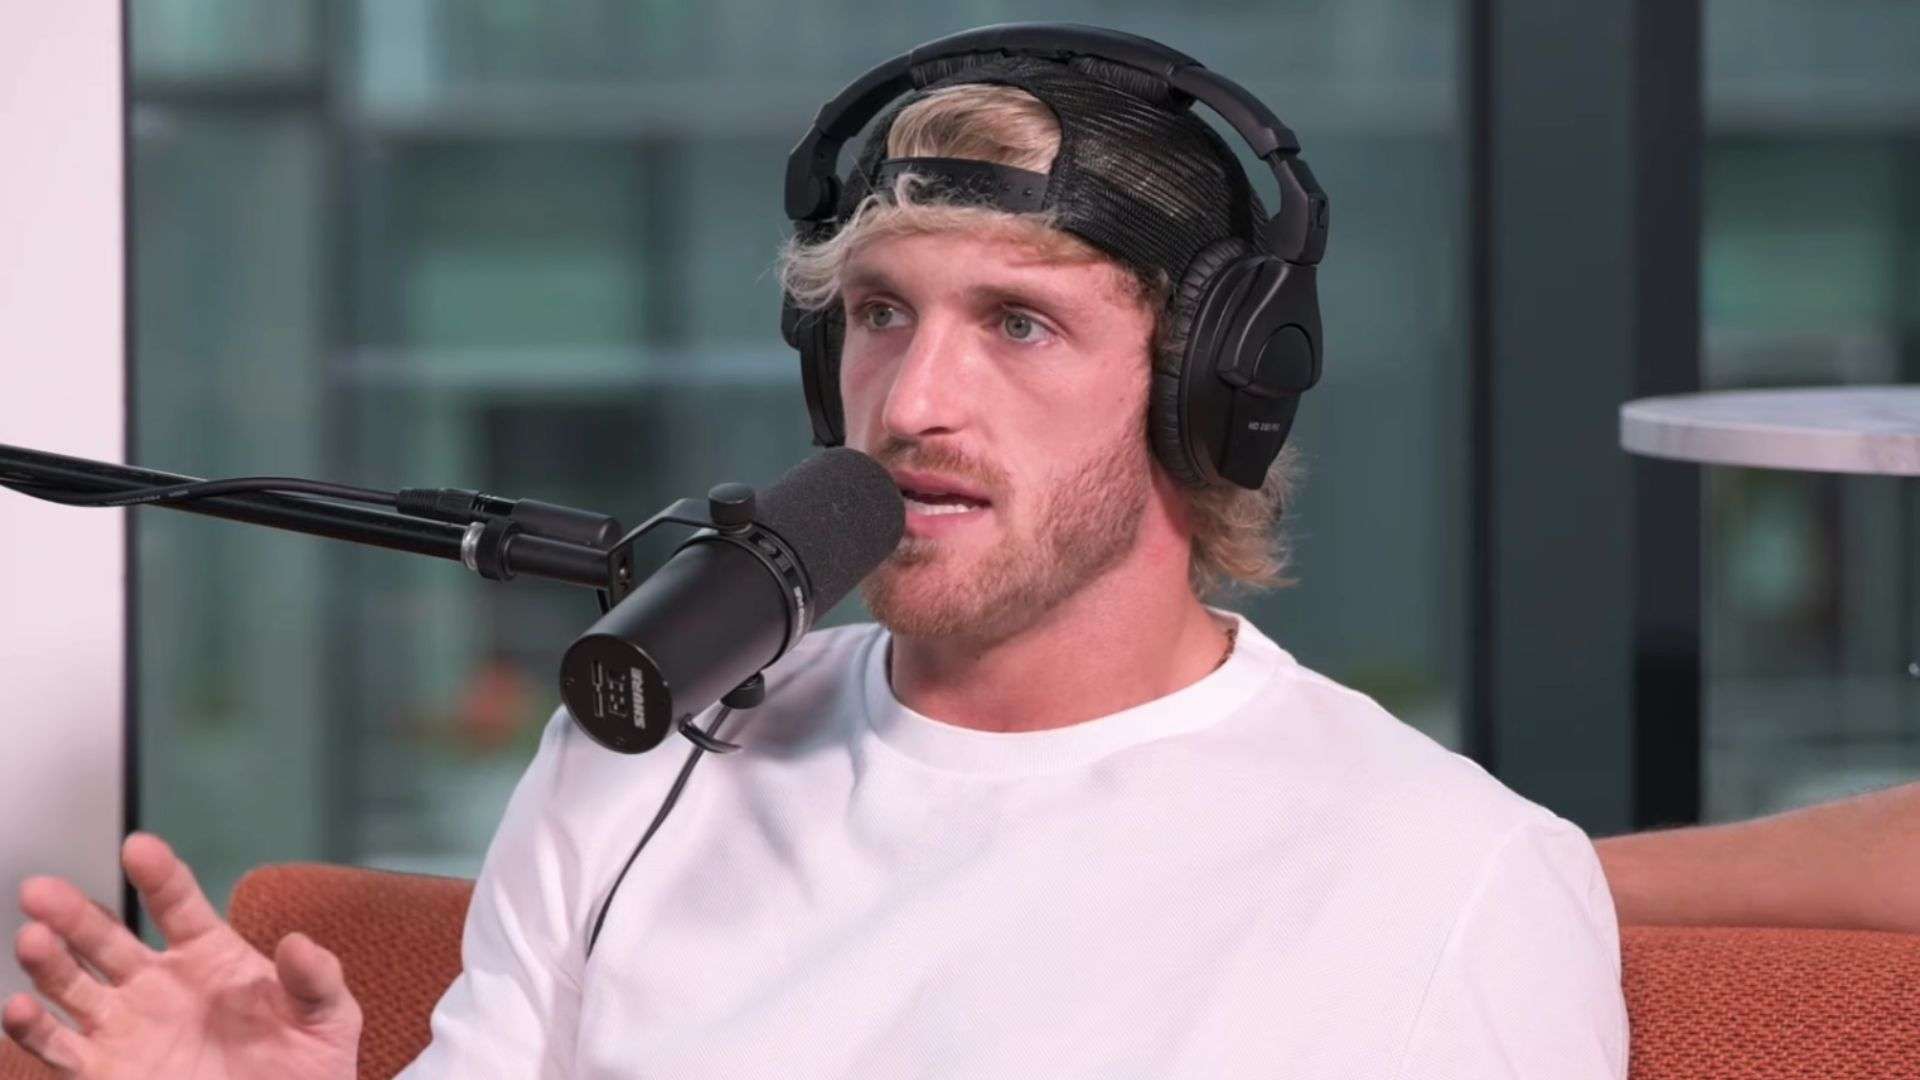 Logan Paul in white shirt and backwards hat sat on couch talking into mic